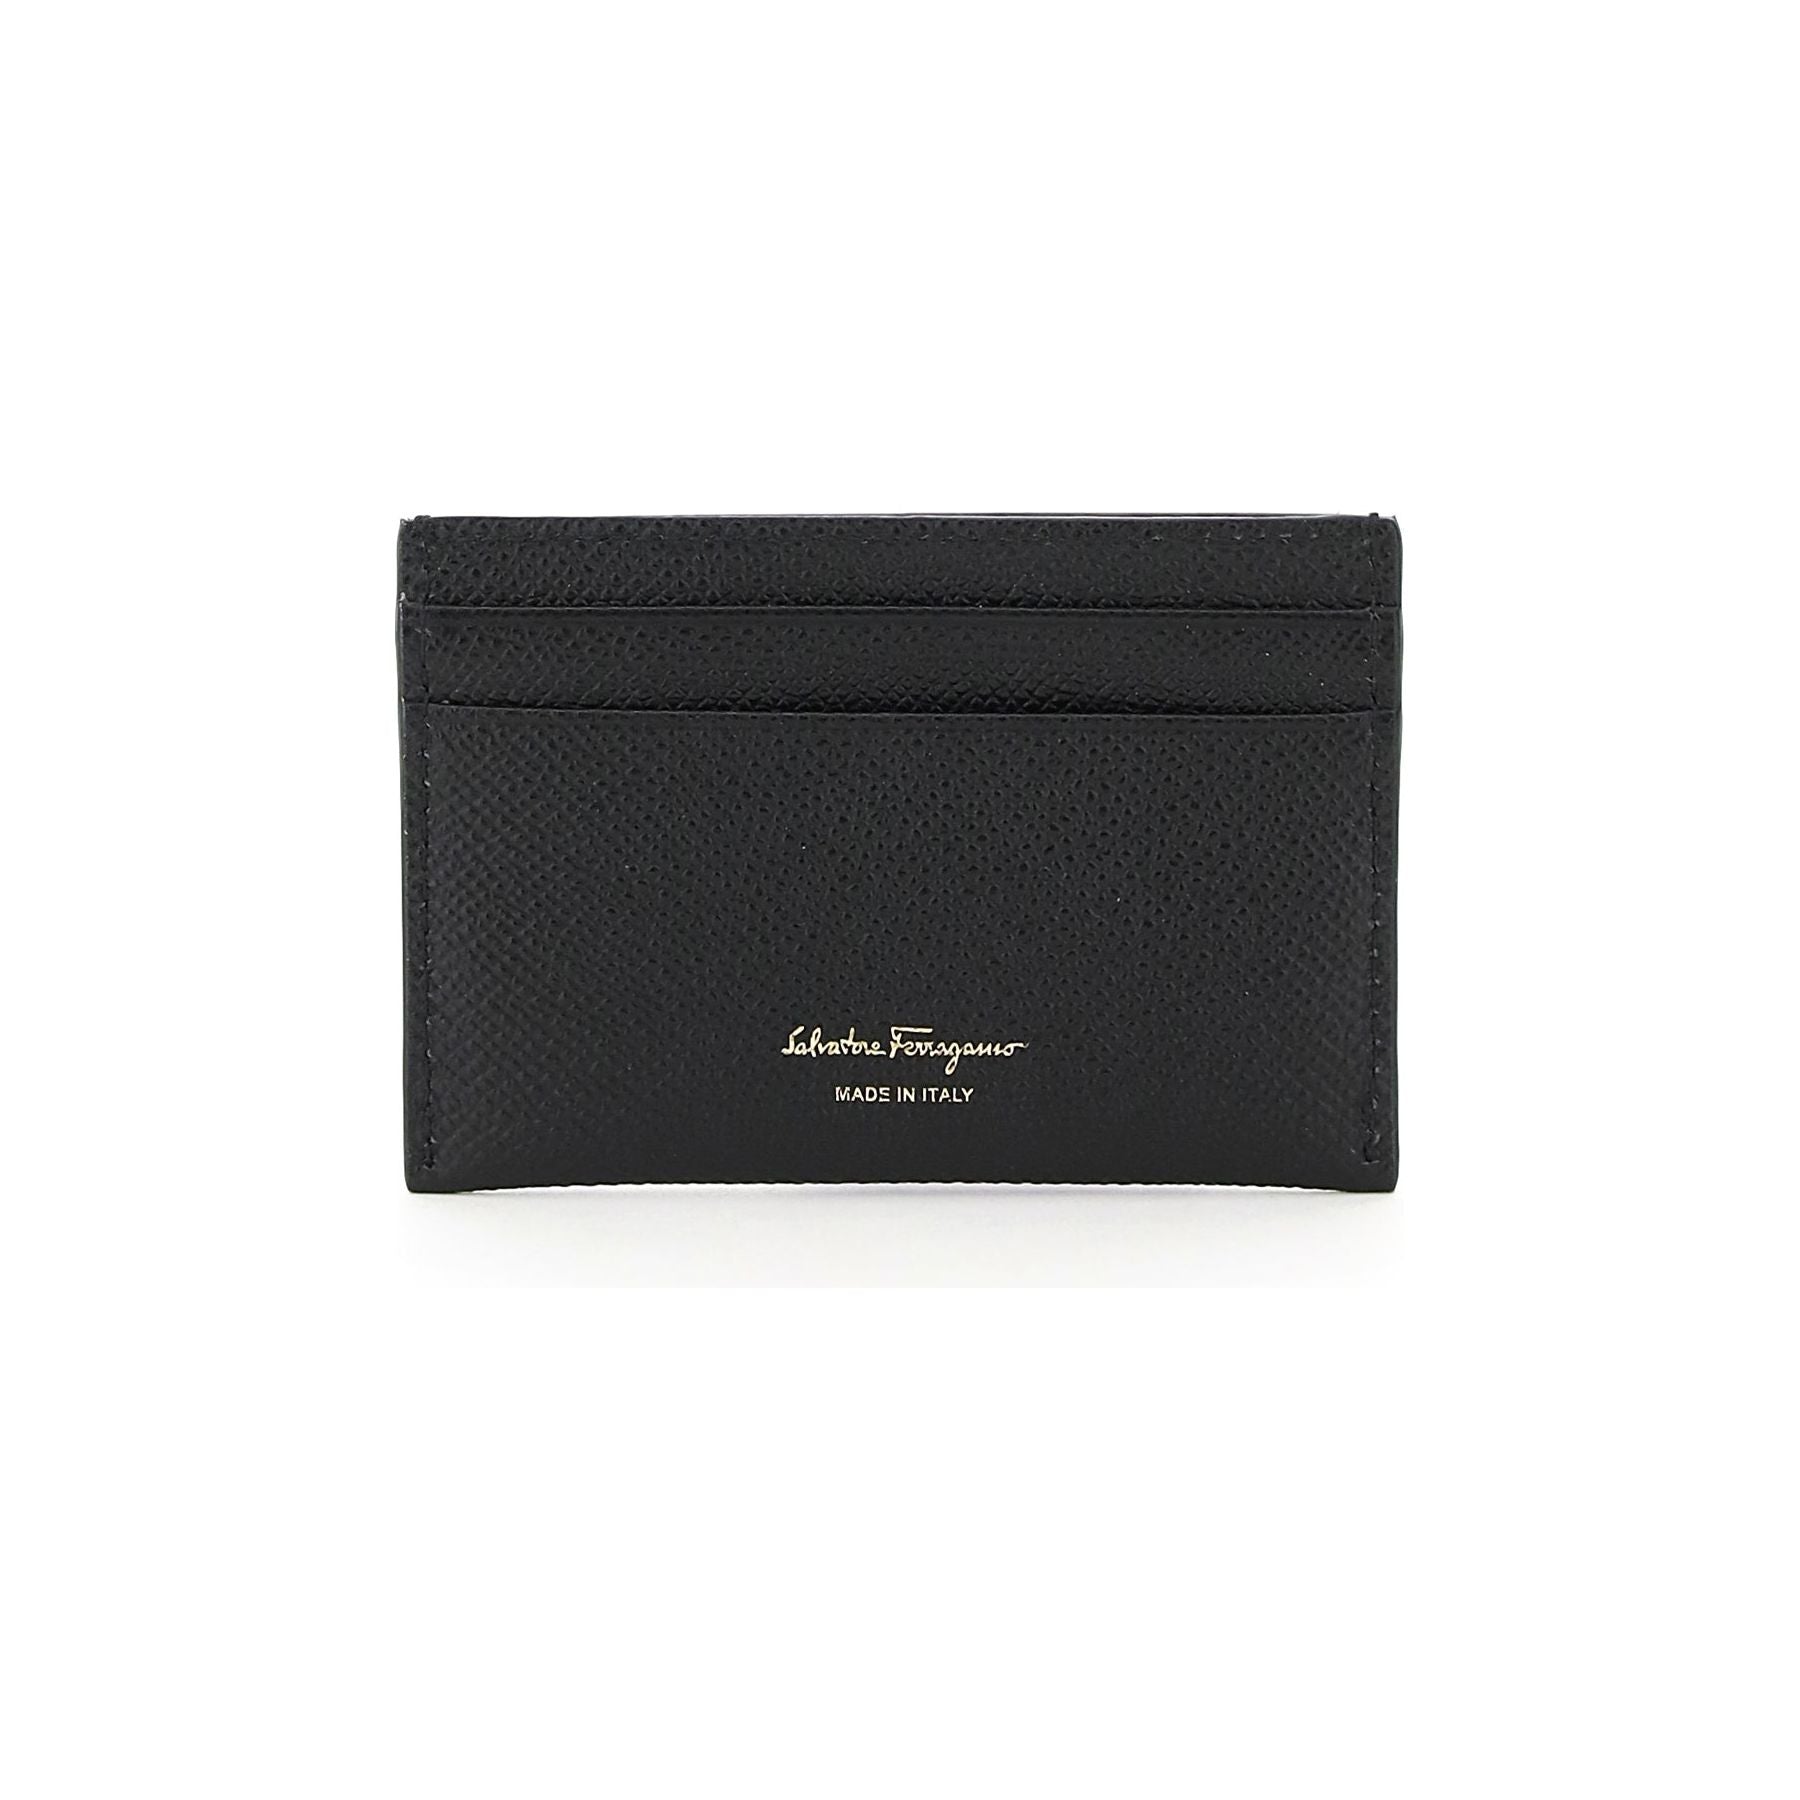 Grained Leather Gancini Card Holder